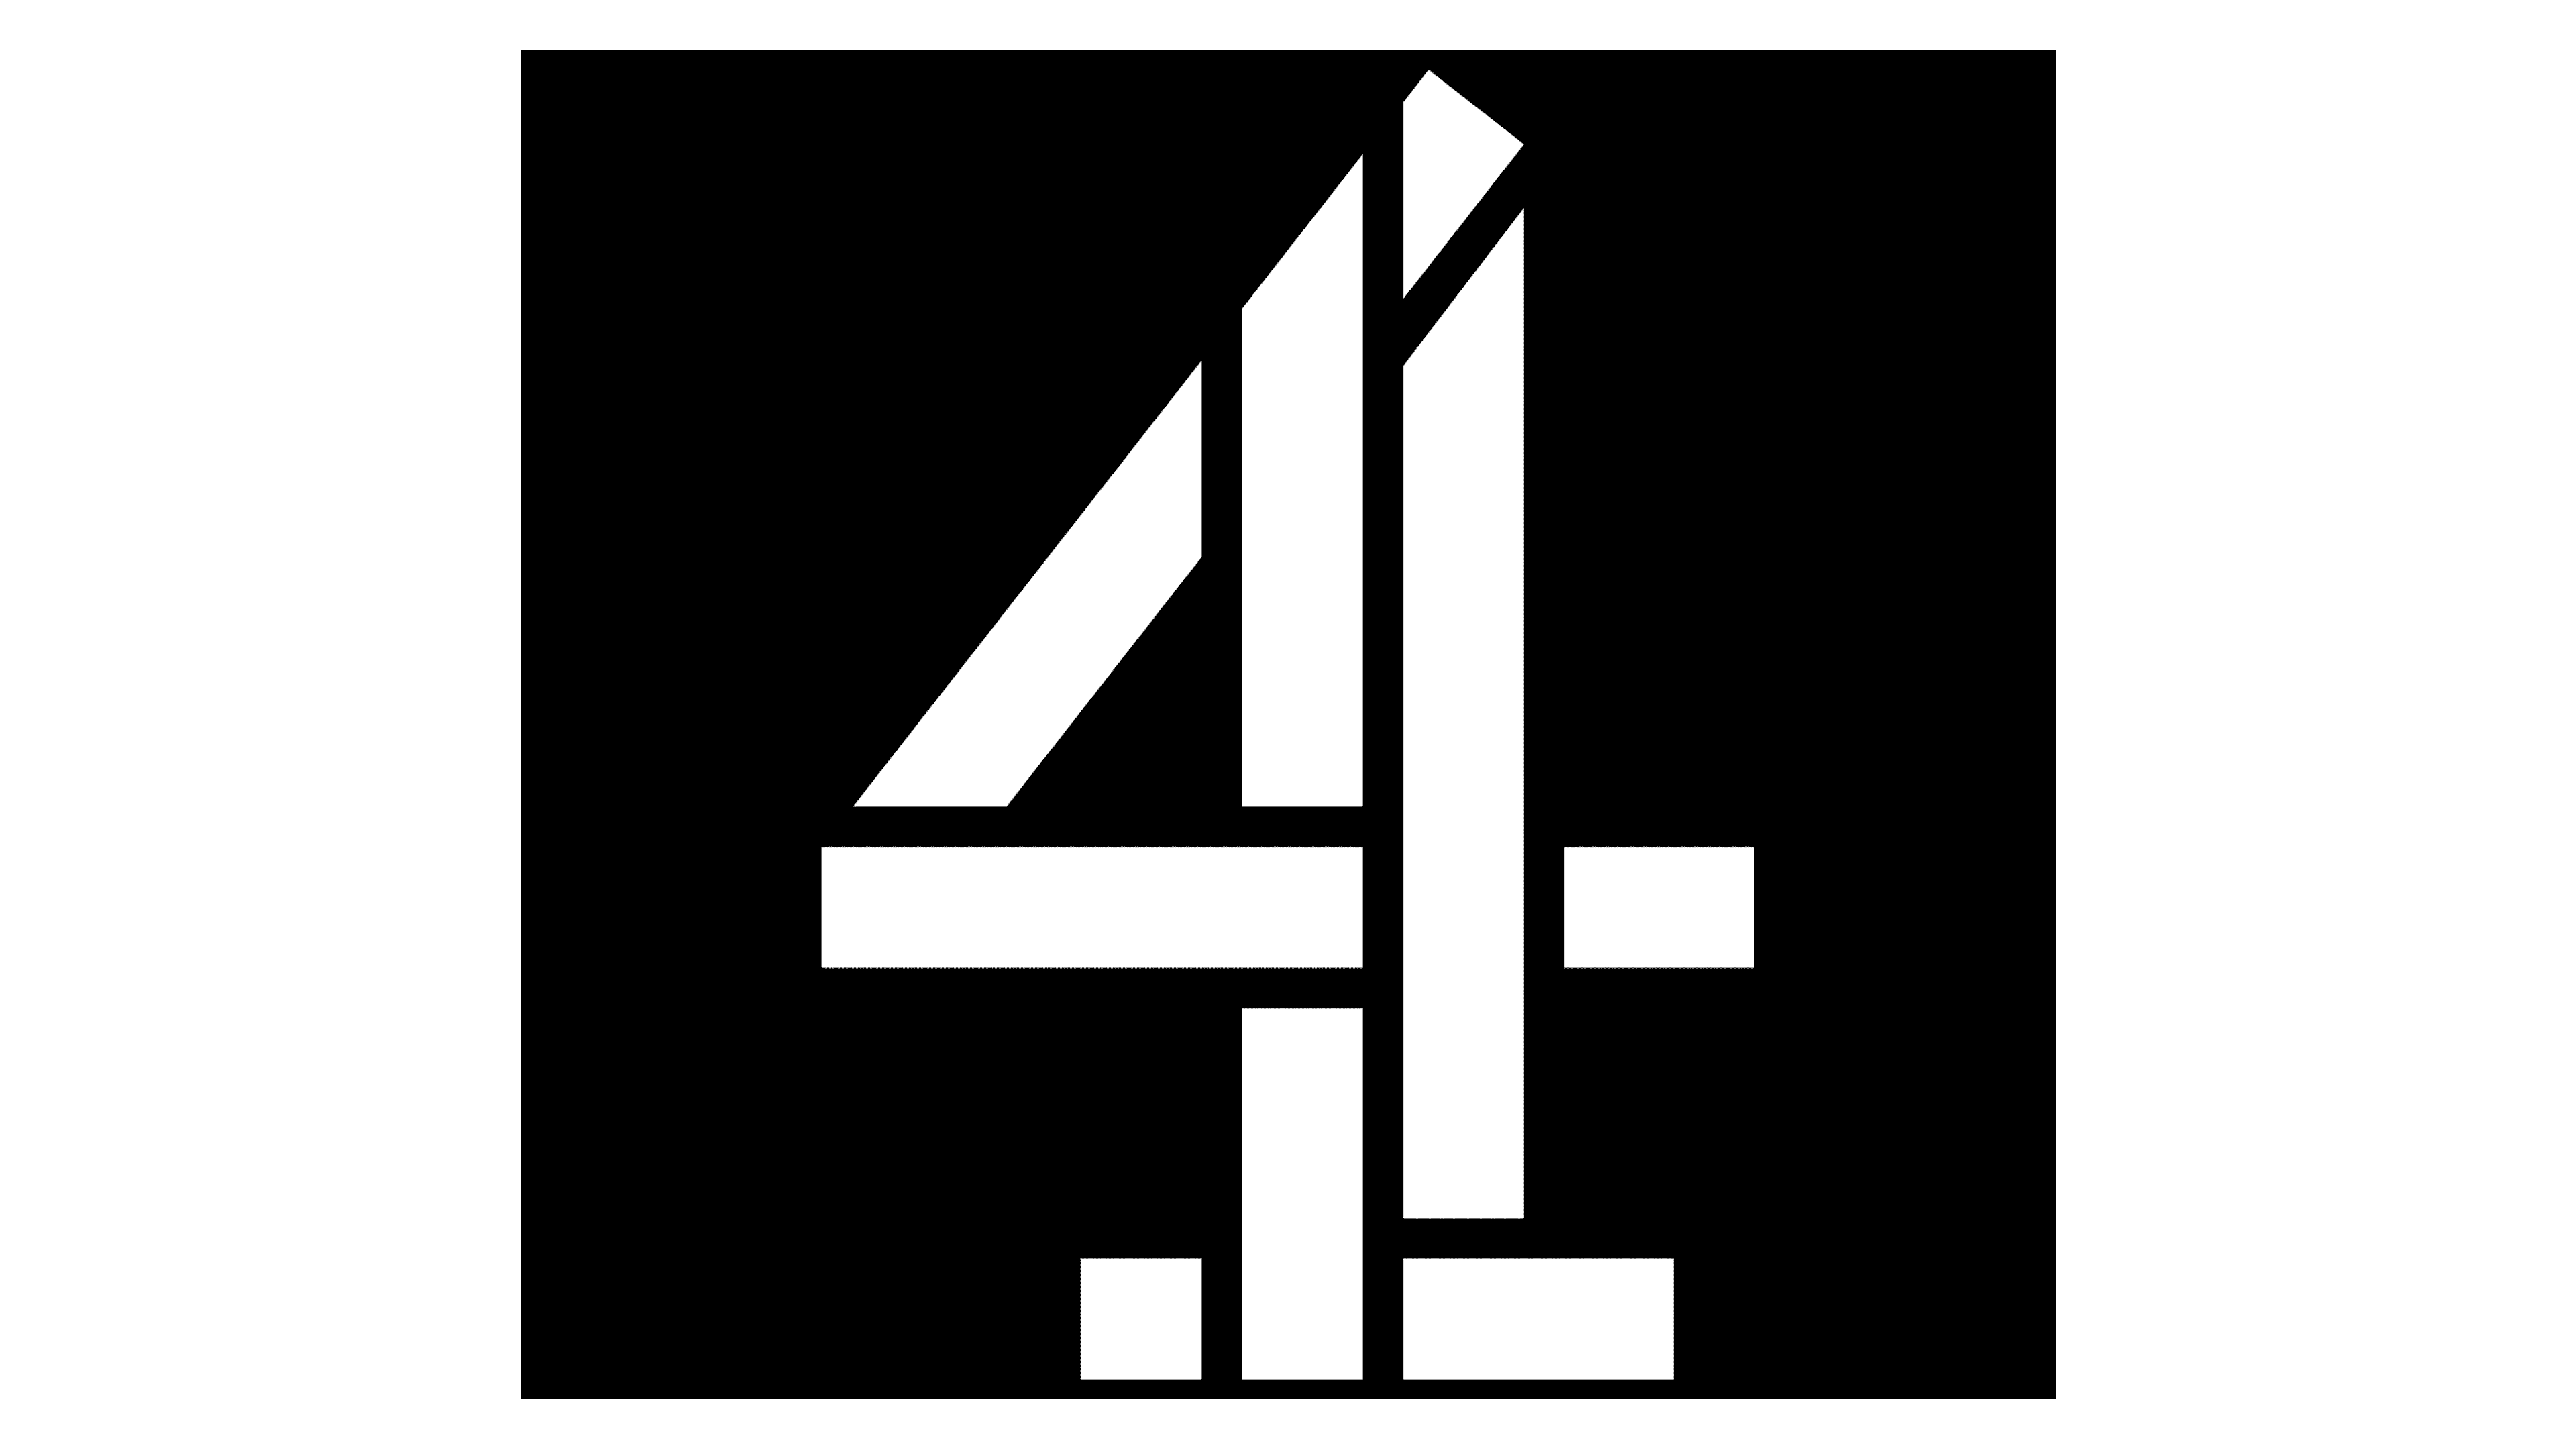 Channel 4 Logo and symbol, meaning, history, sign.